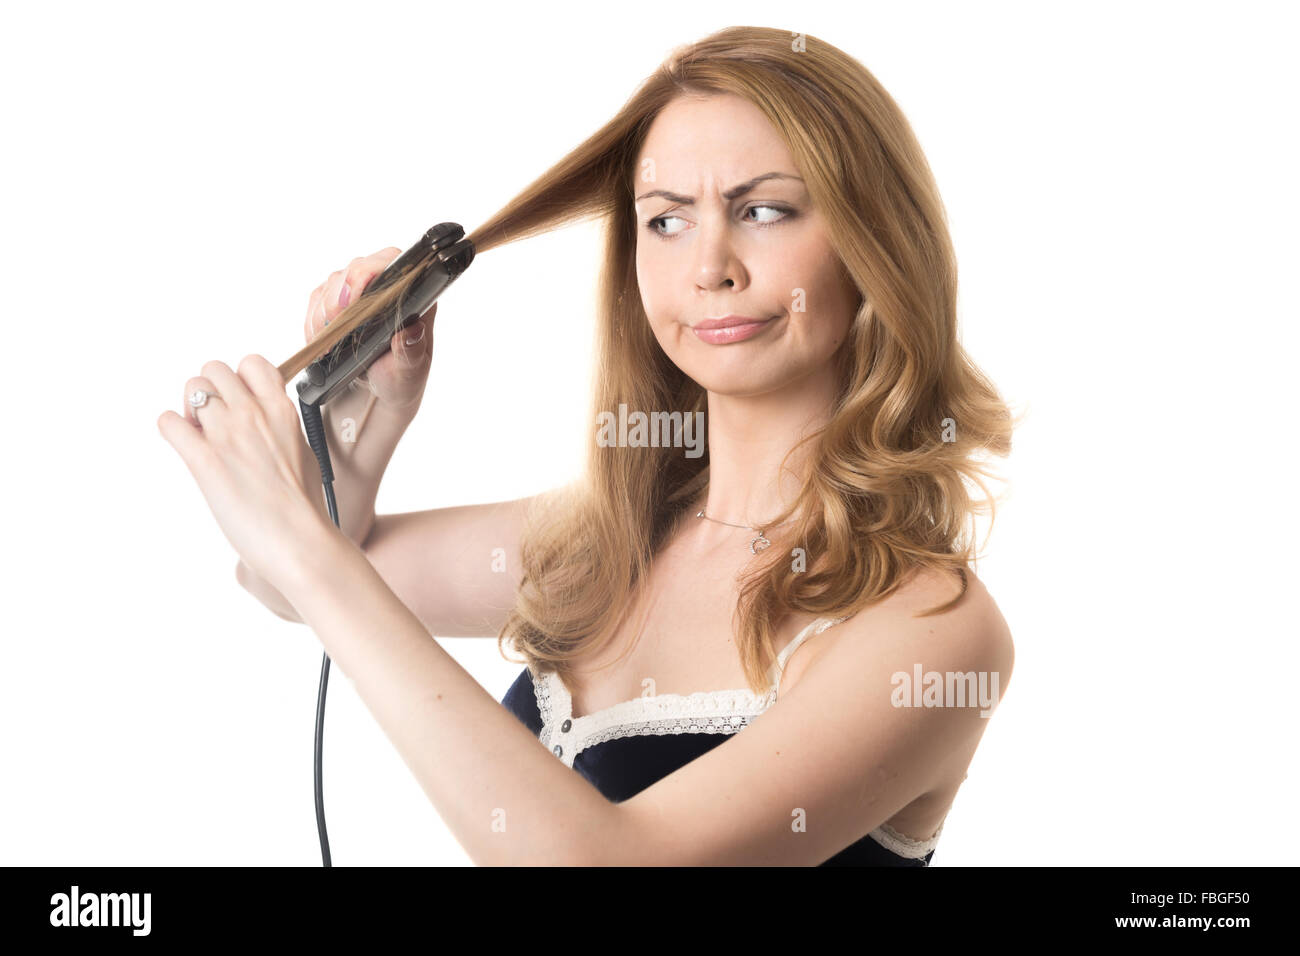 Funny frowning young attractive blond woman holding hair straightener, in bad mood because of her hairstyle, studio isolated por Stock Photo